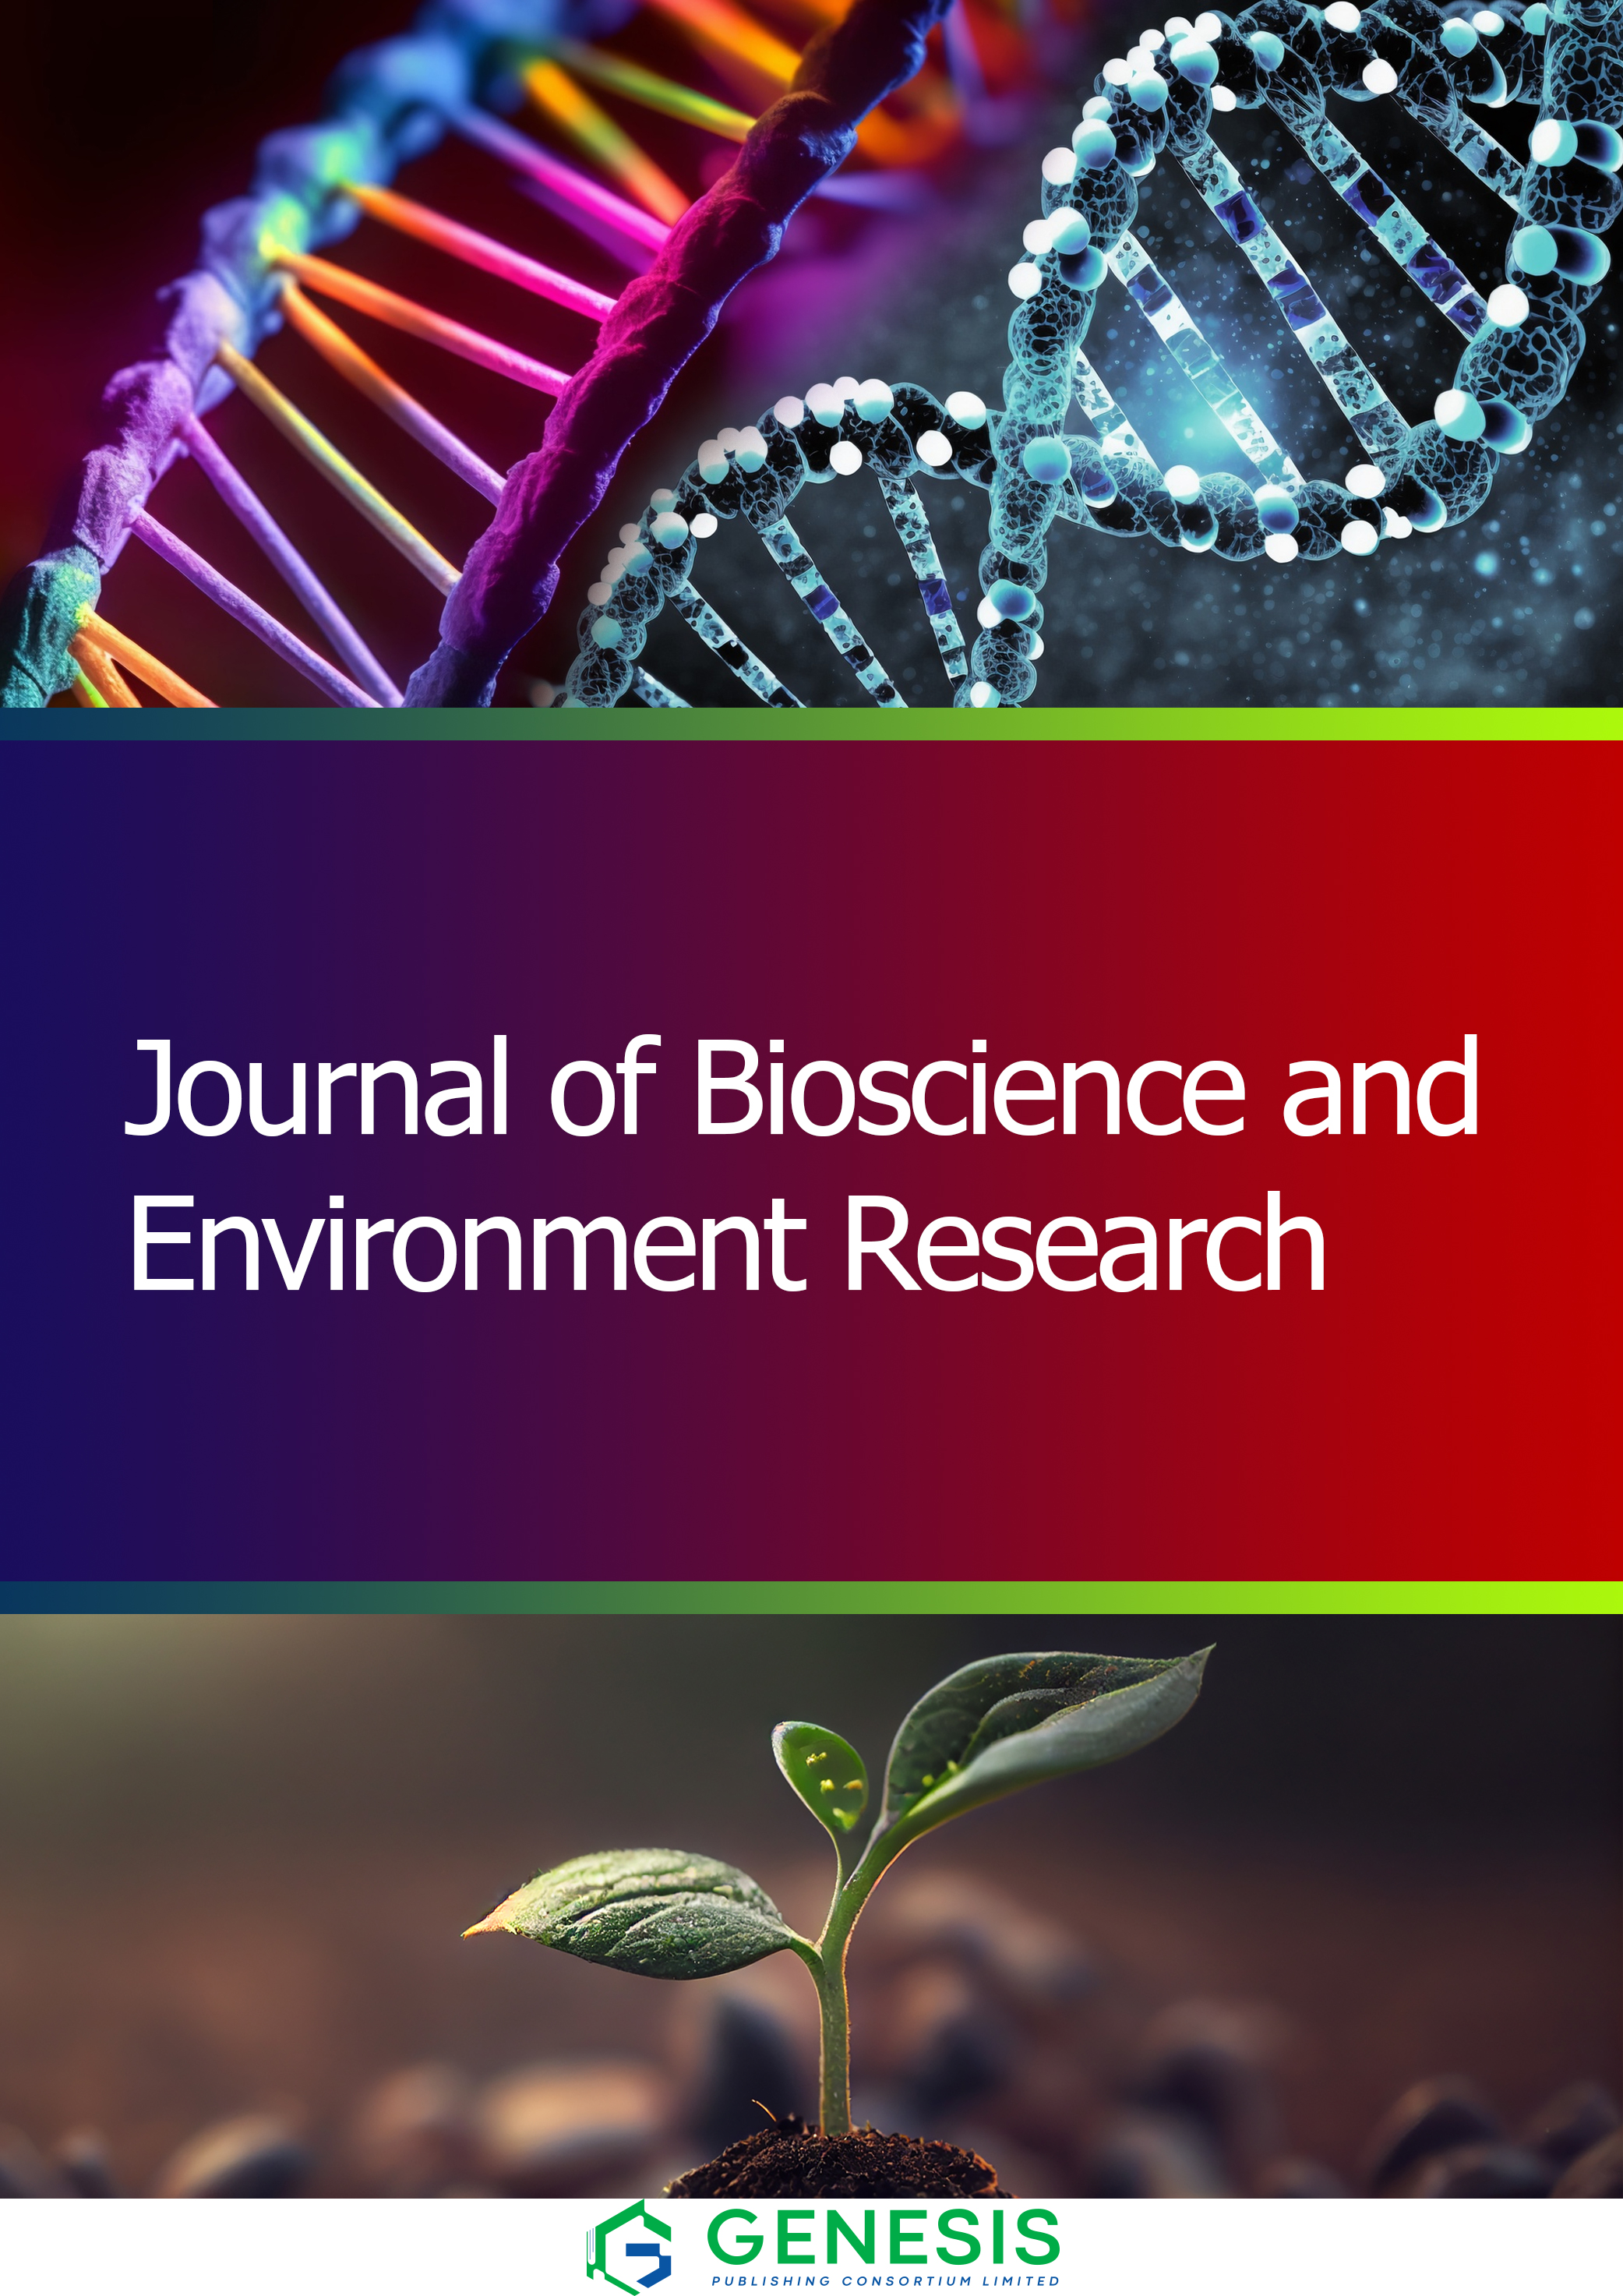 Journal of Bioscience and Environment Research